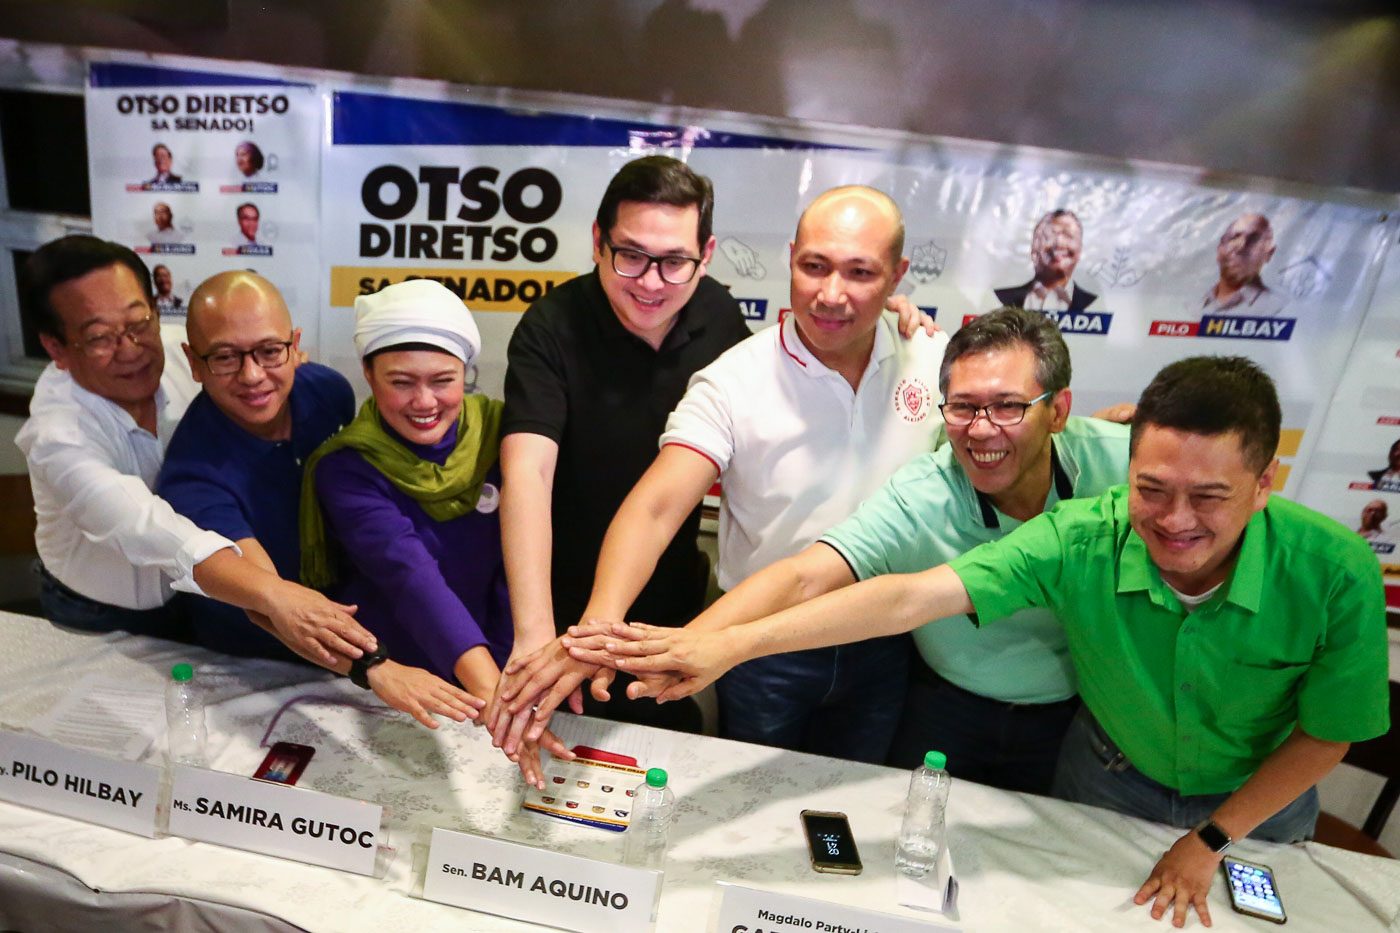 Otso Diretso begins tough challenge of campaigning as underdogs